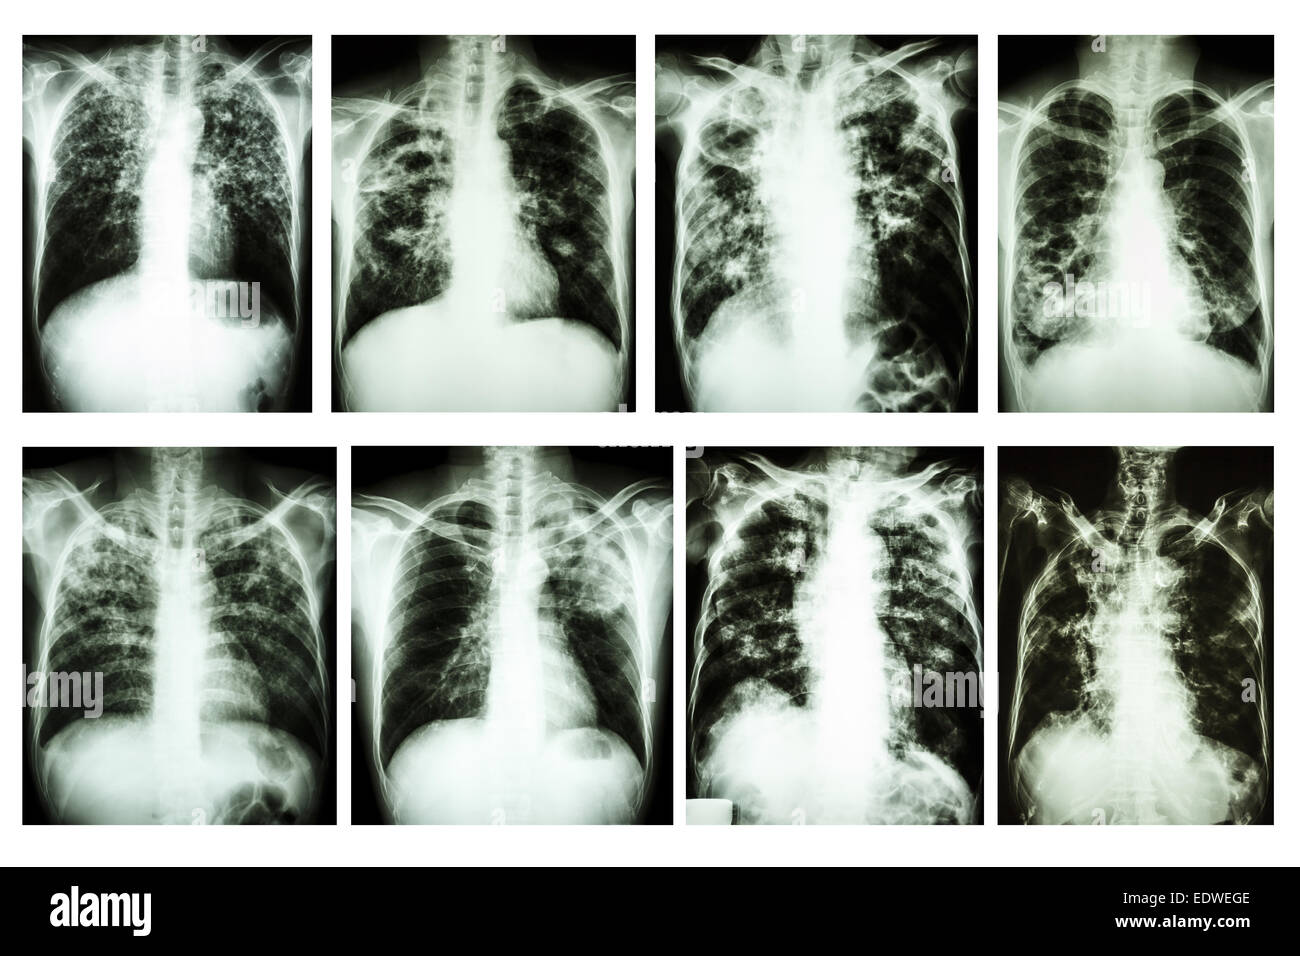 Collection of chest x-ray 'Pulmonary tuberculosis' Stock Photo